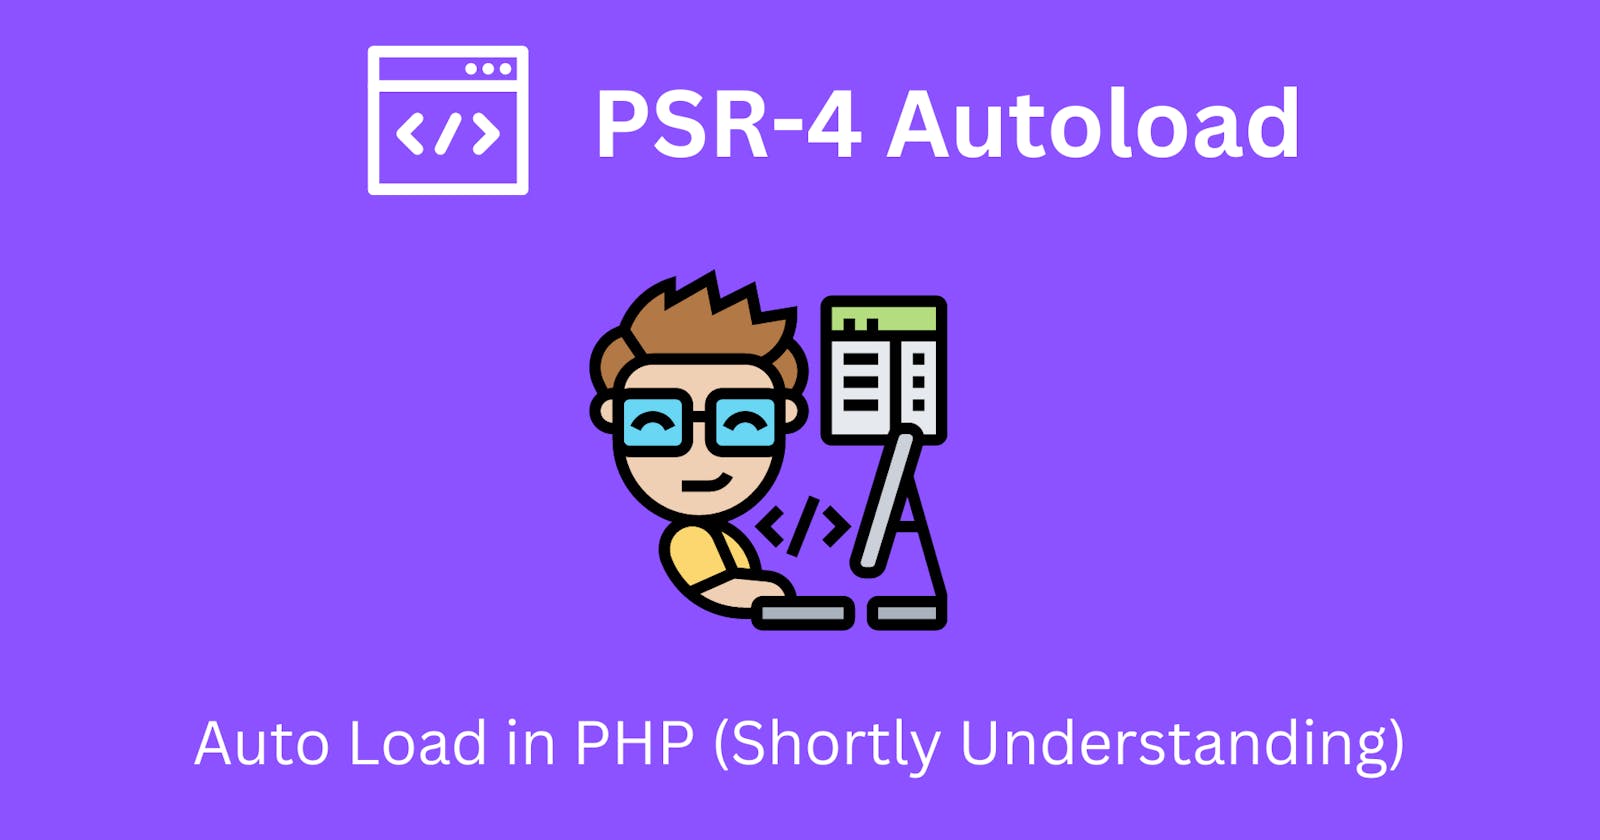 Auto Load in PHP (Shortly Understanding)